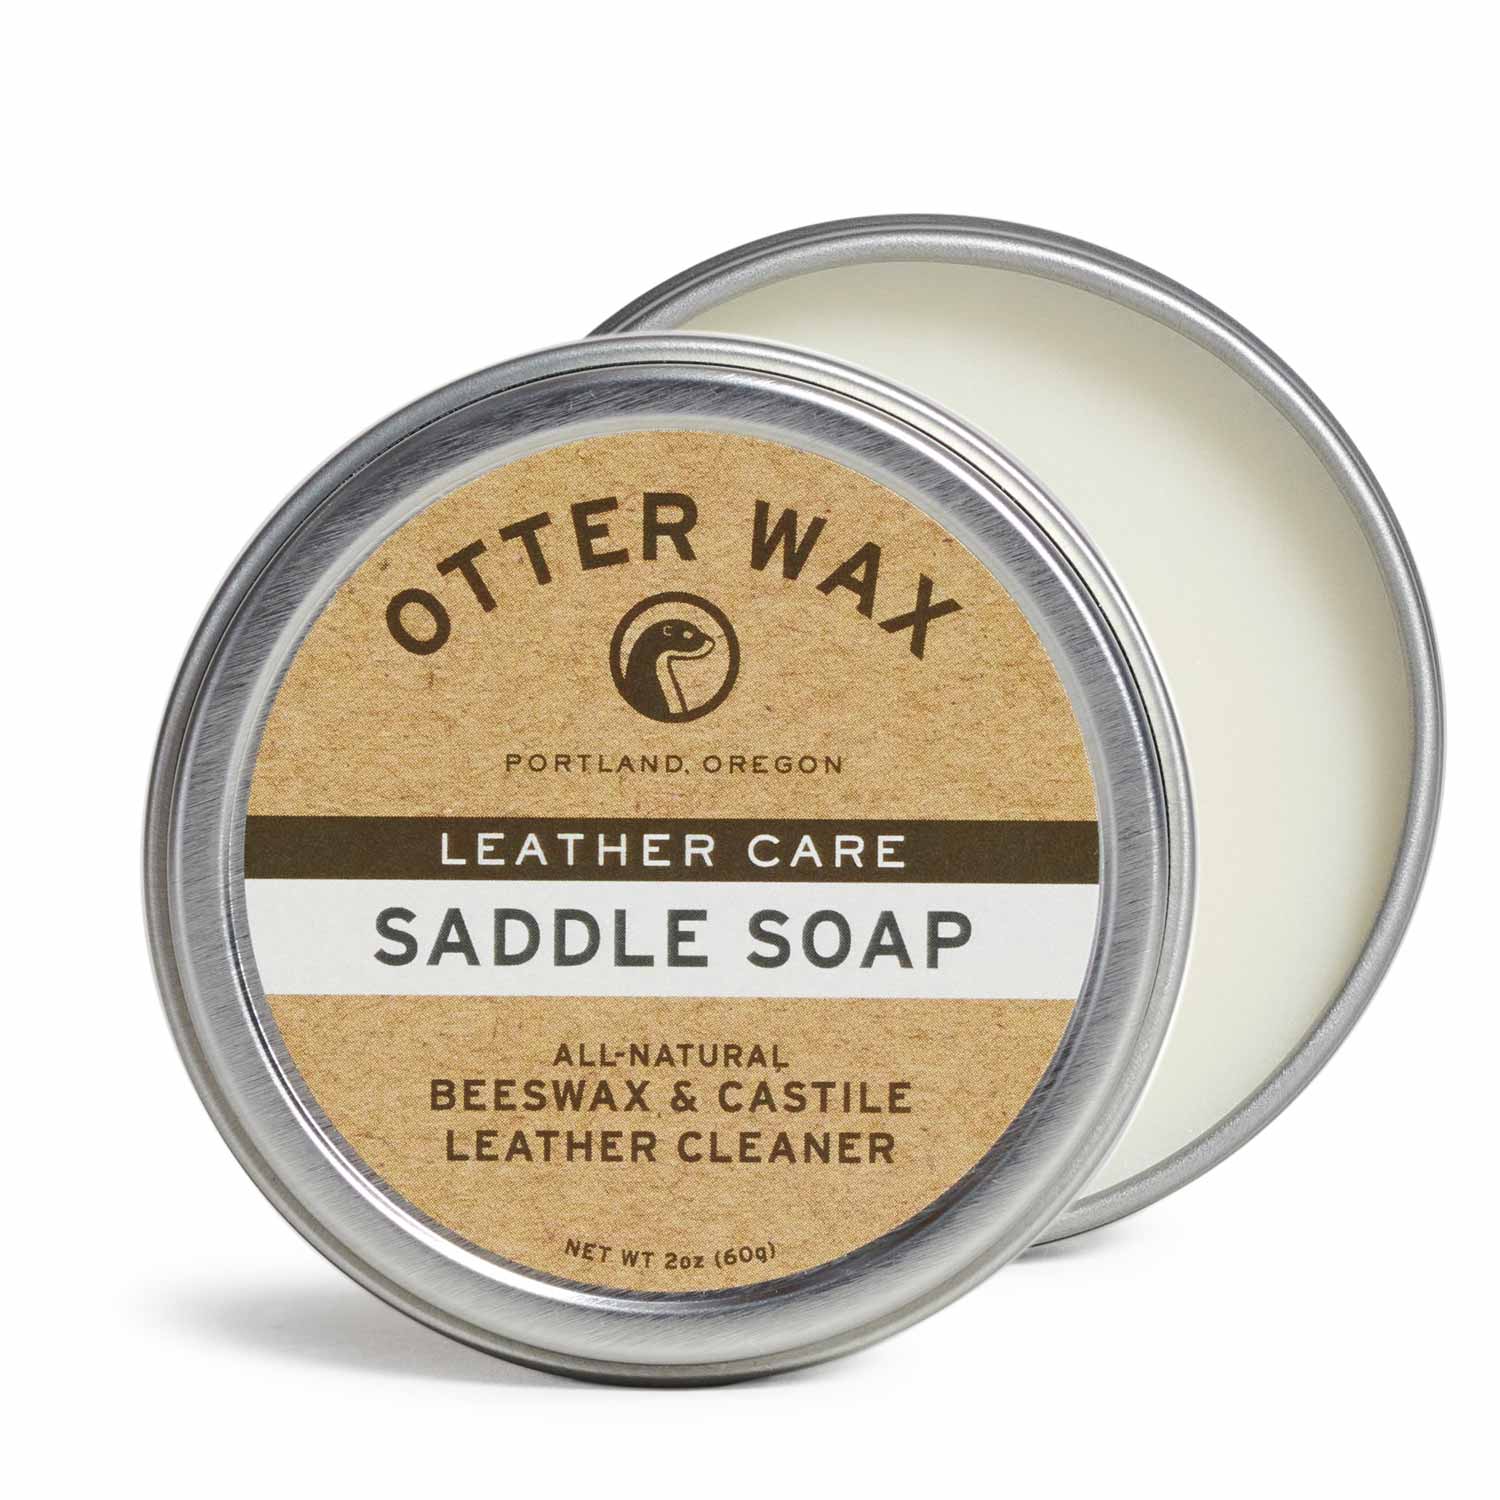  Otter Wax Saddle Soap, 5oz, All-Natural Universal Leather  Cleaner